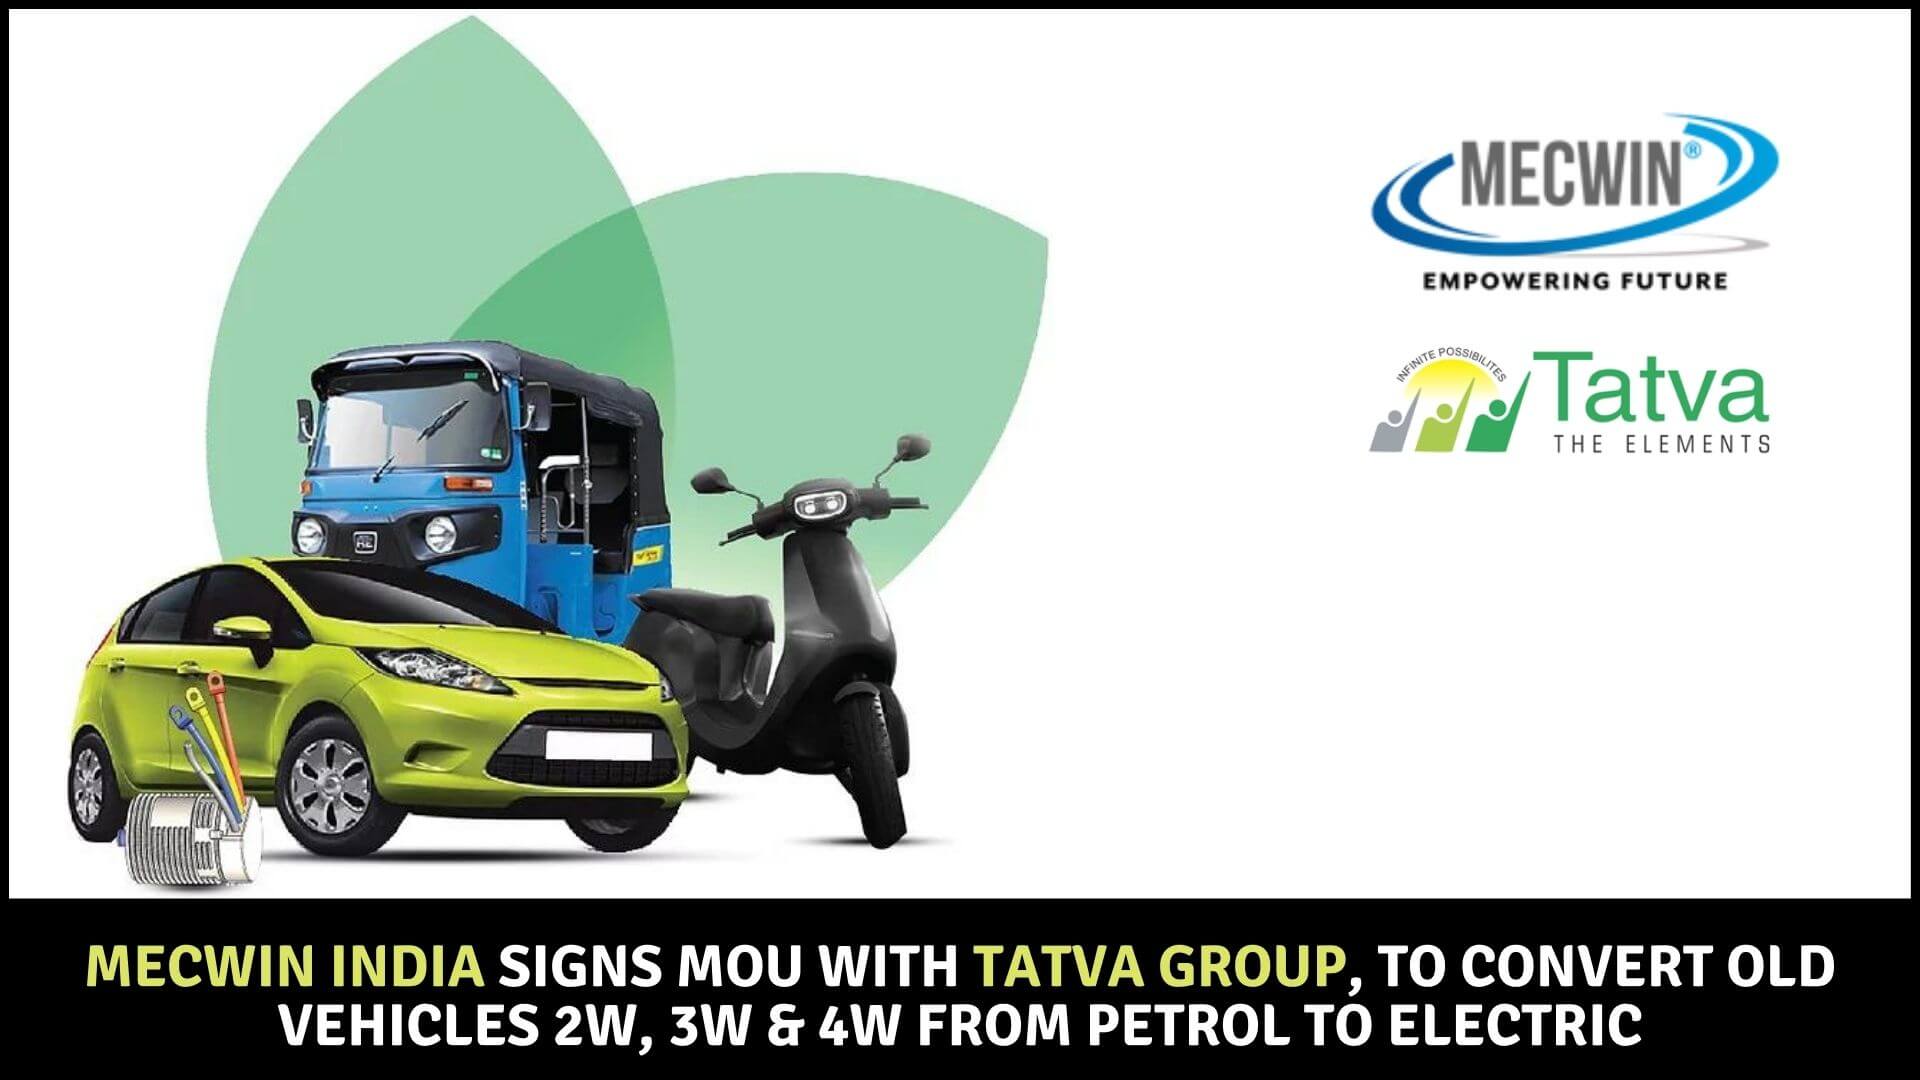 https://e-vehicleinfo.com/mecwin-india-signs-mou-with-tatva-group-to-convert-old-petrol-vehicles-to-electric/